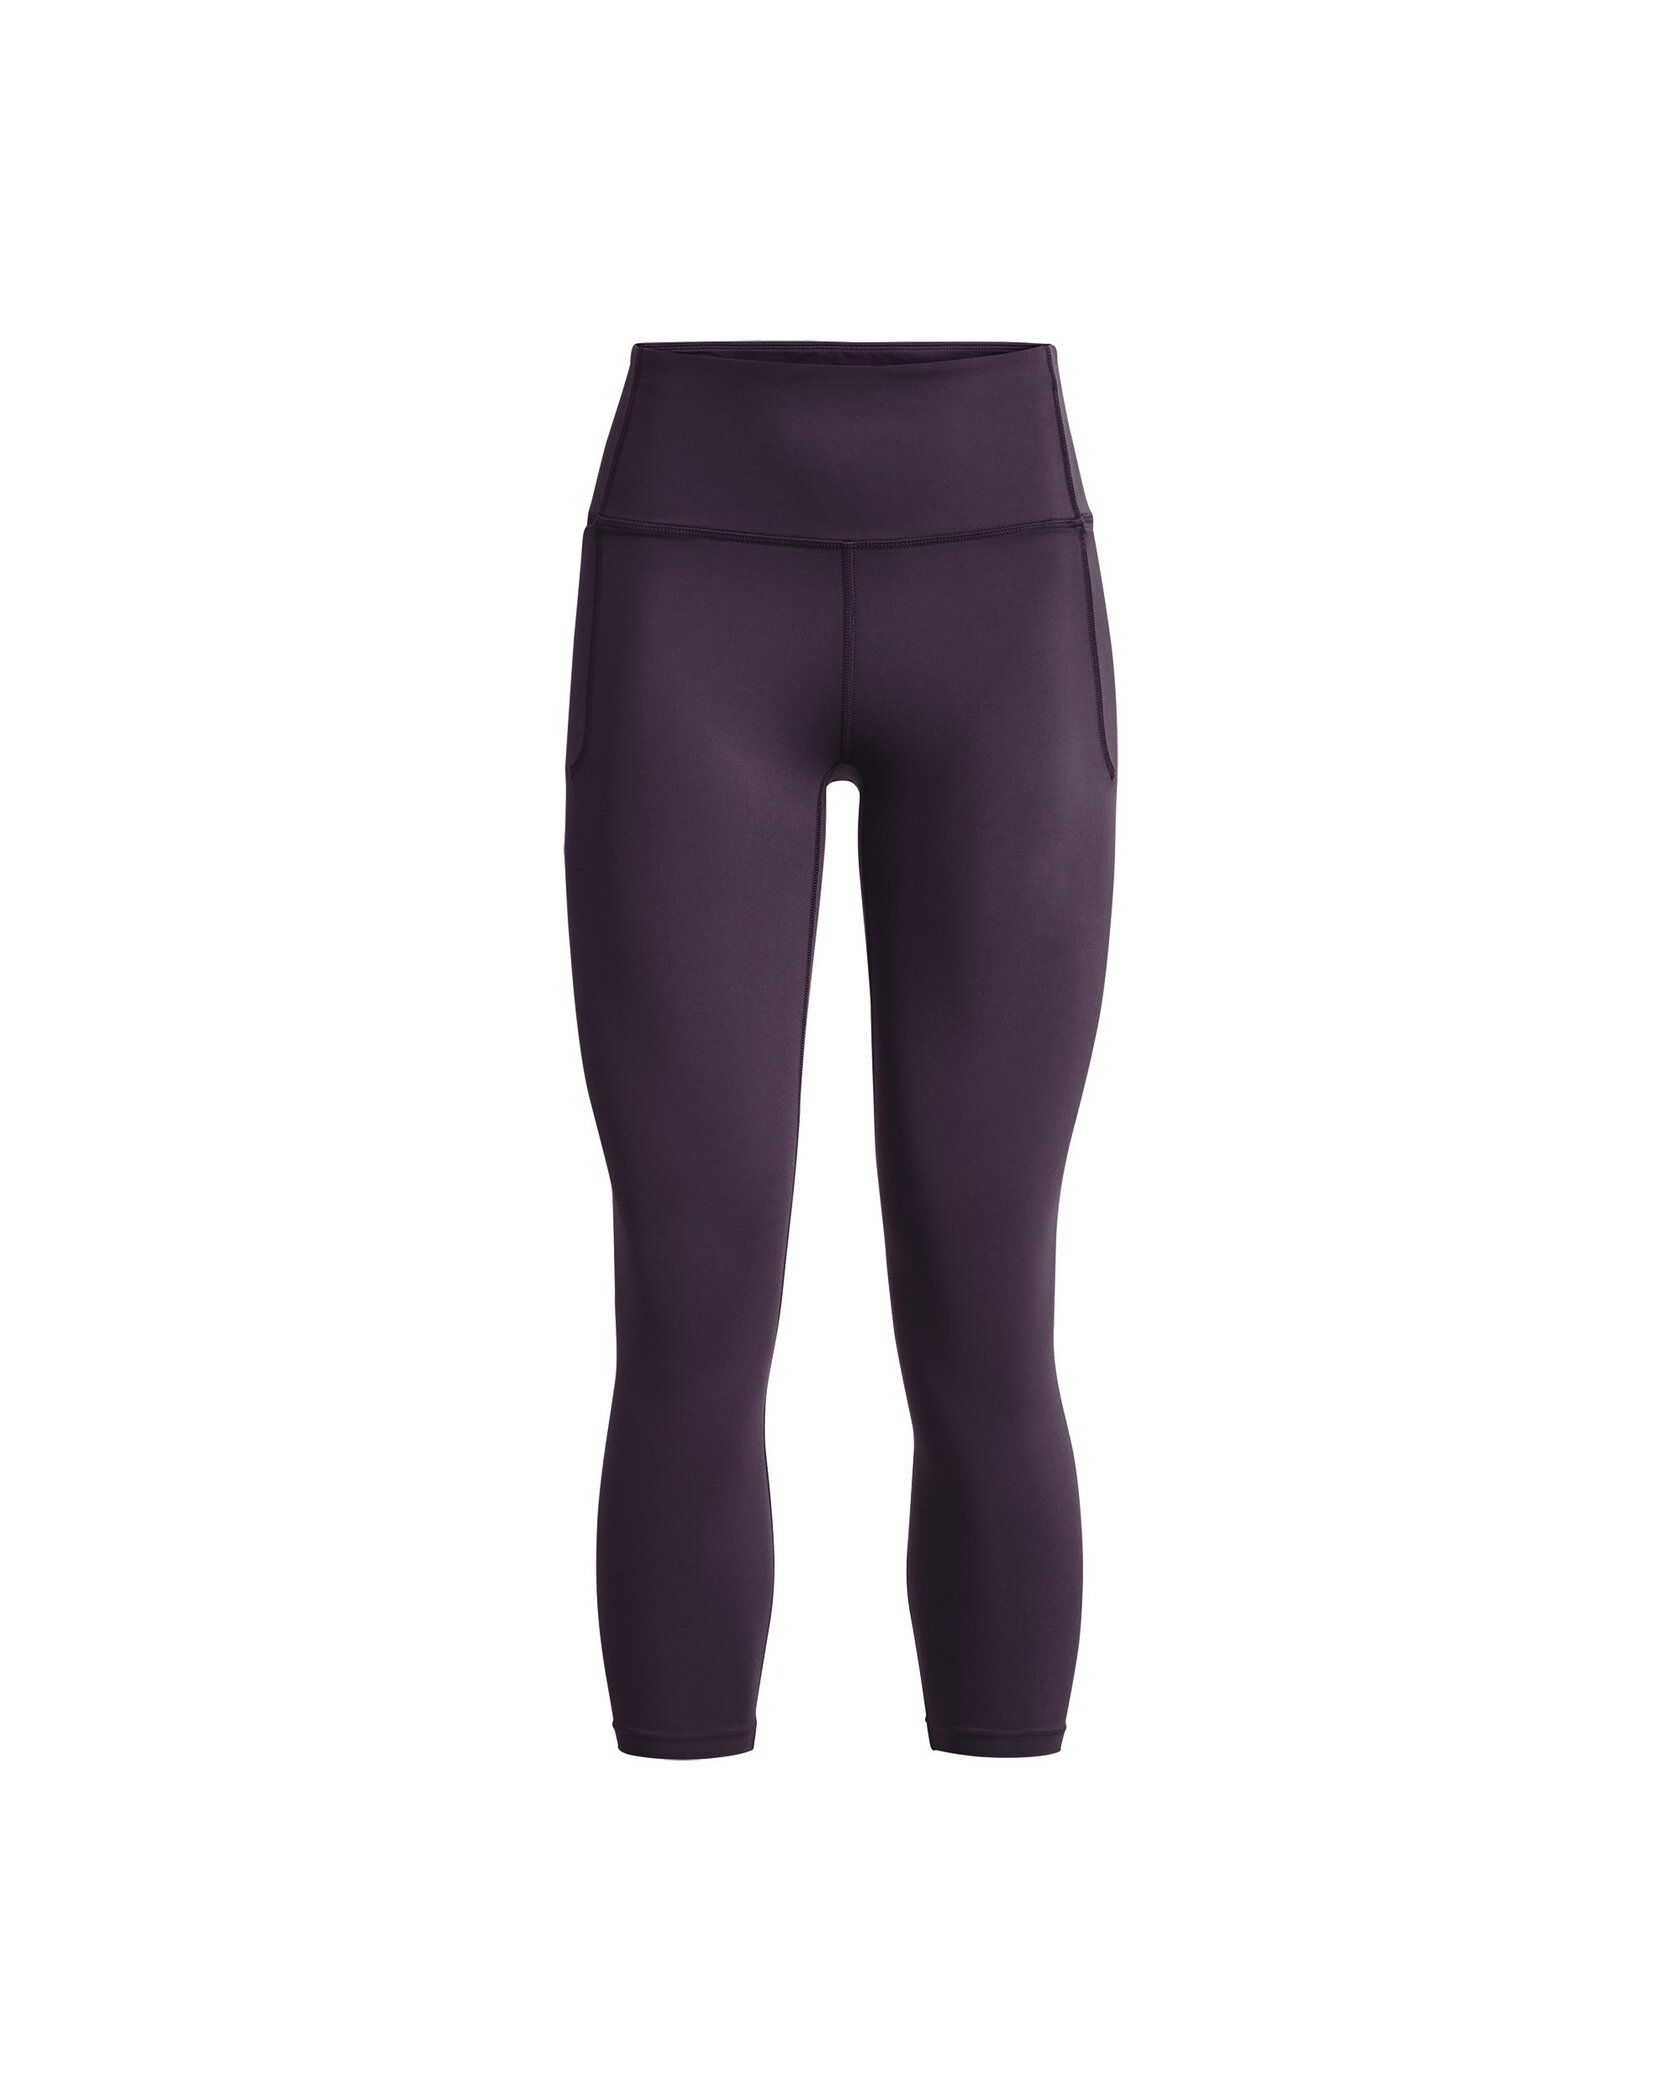 Under Armour Meridian Ultra High Rise Leggings for Ladies - Tent/Metallic  Silver - XL